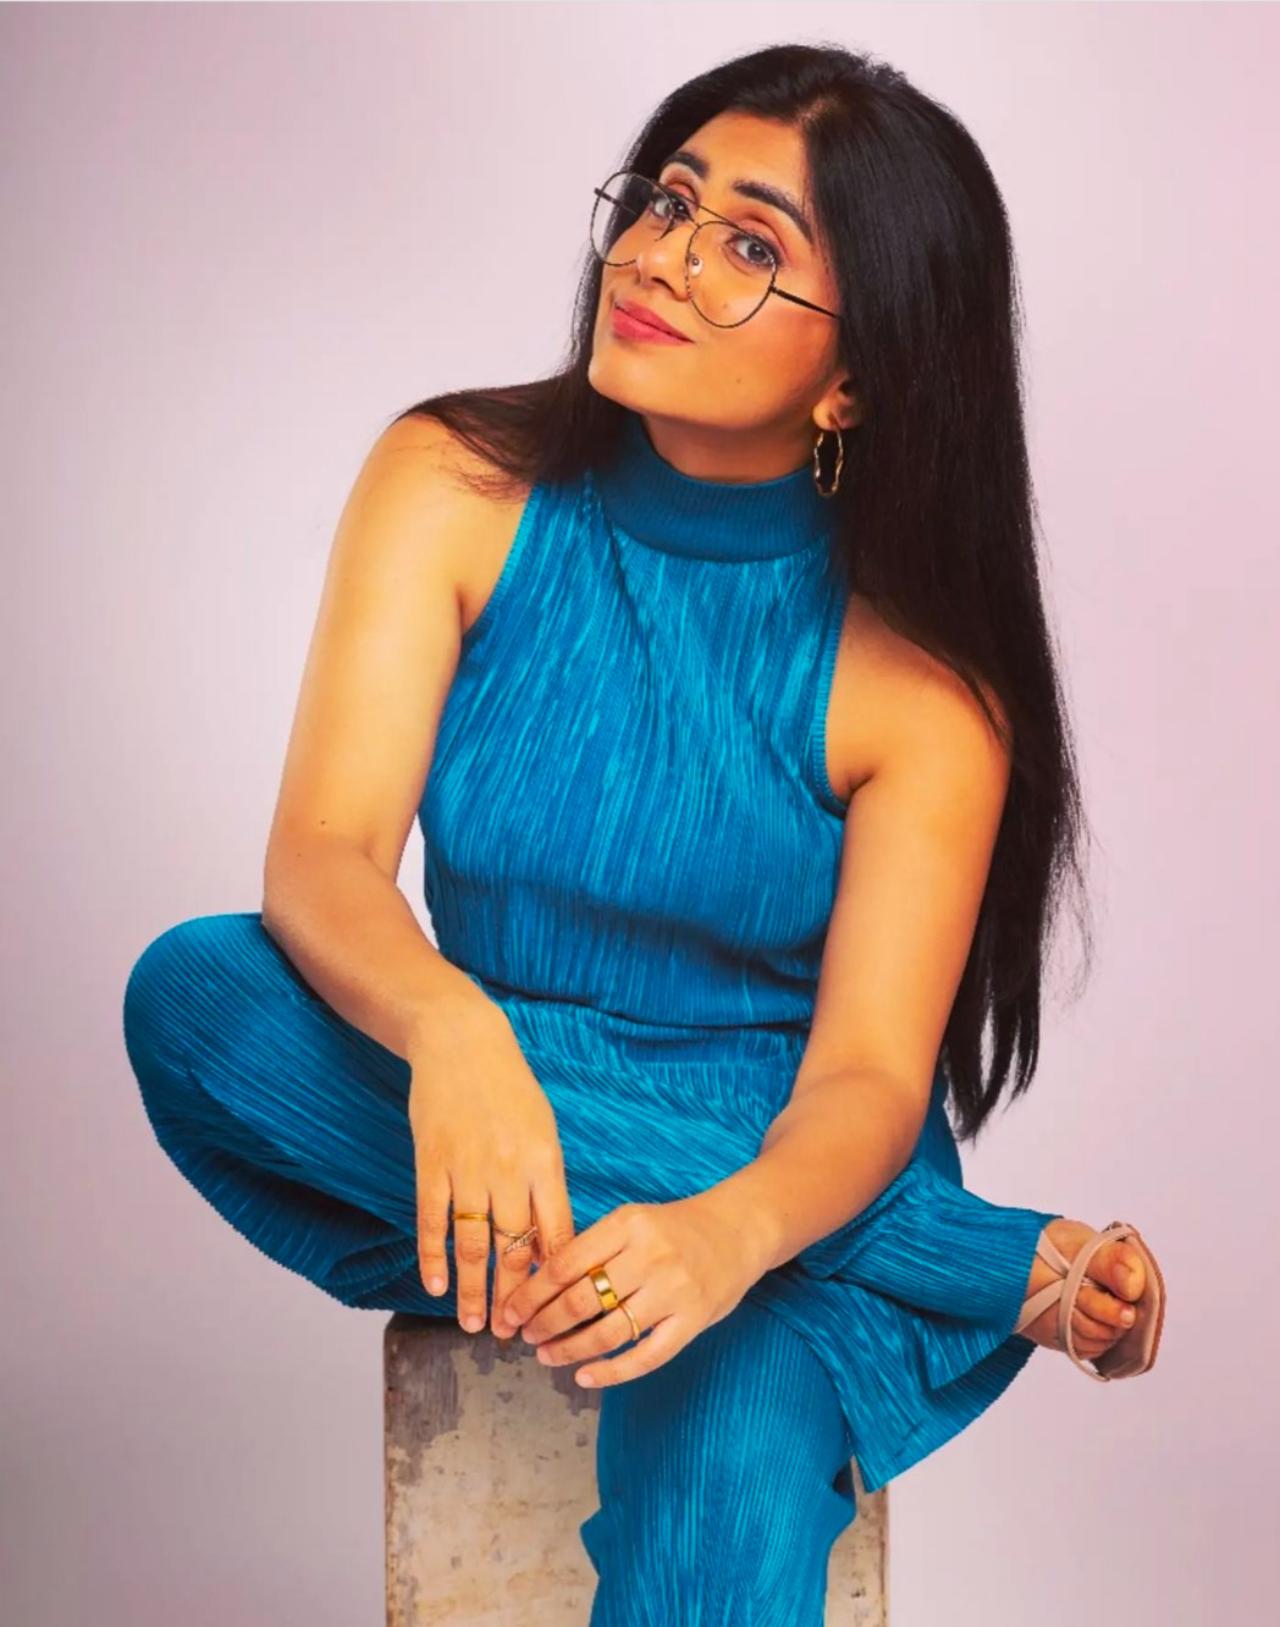 Prashasti SinghIf anyone said women are not funny, then  Prashasti Singh can immediately prove them wrong. Prashasti does not just do comedy but also has all her scripts in Hindi, making them relatable to her audience. She has also appeared in Hindi shows like Hum Do Teen Chaar